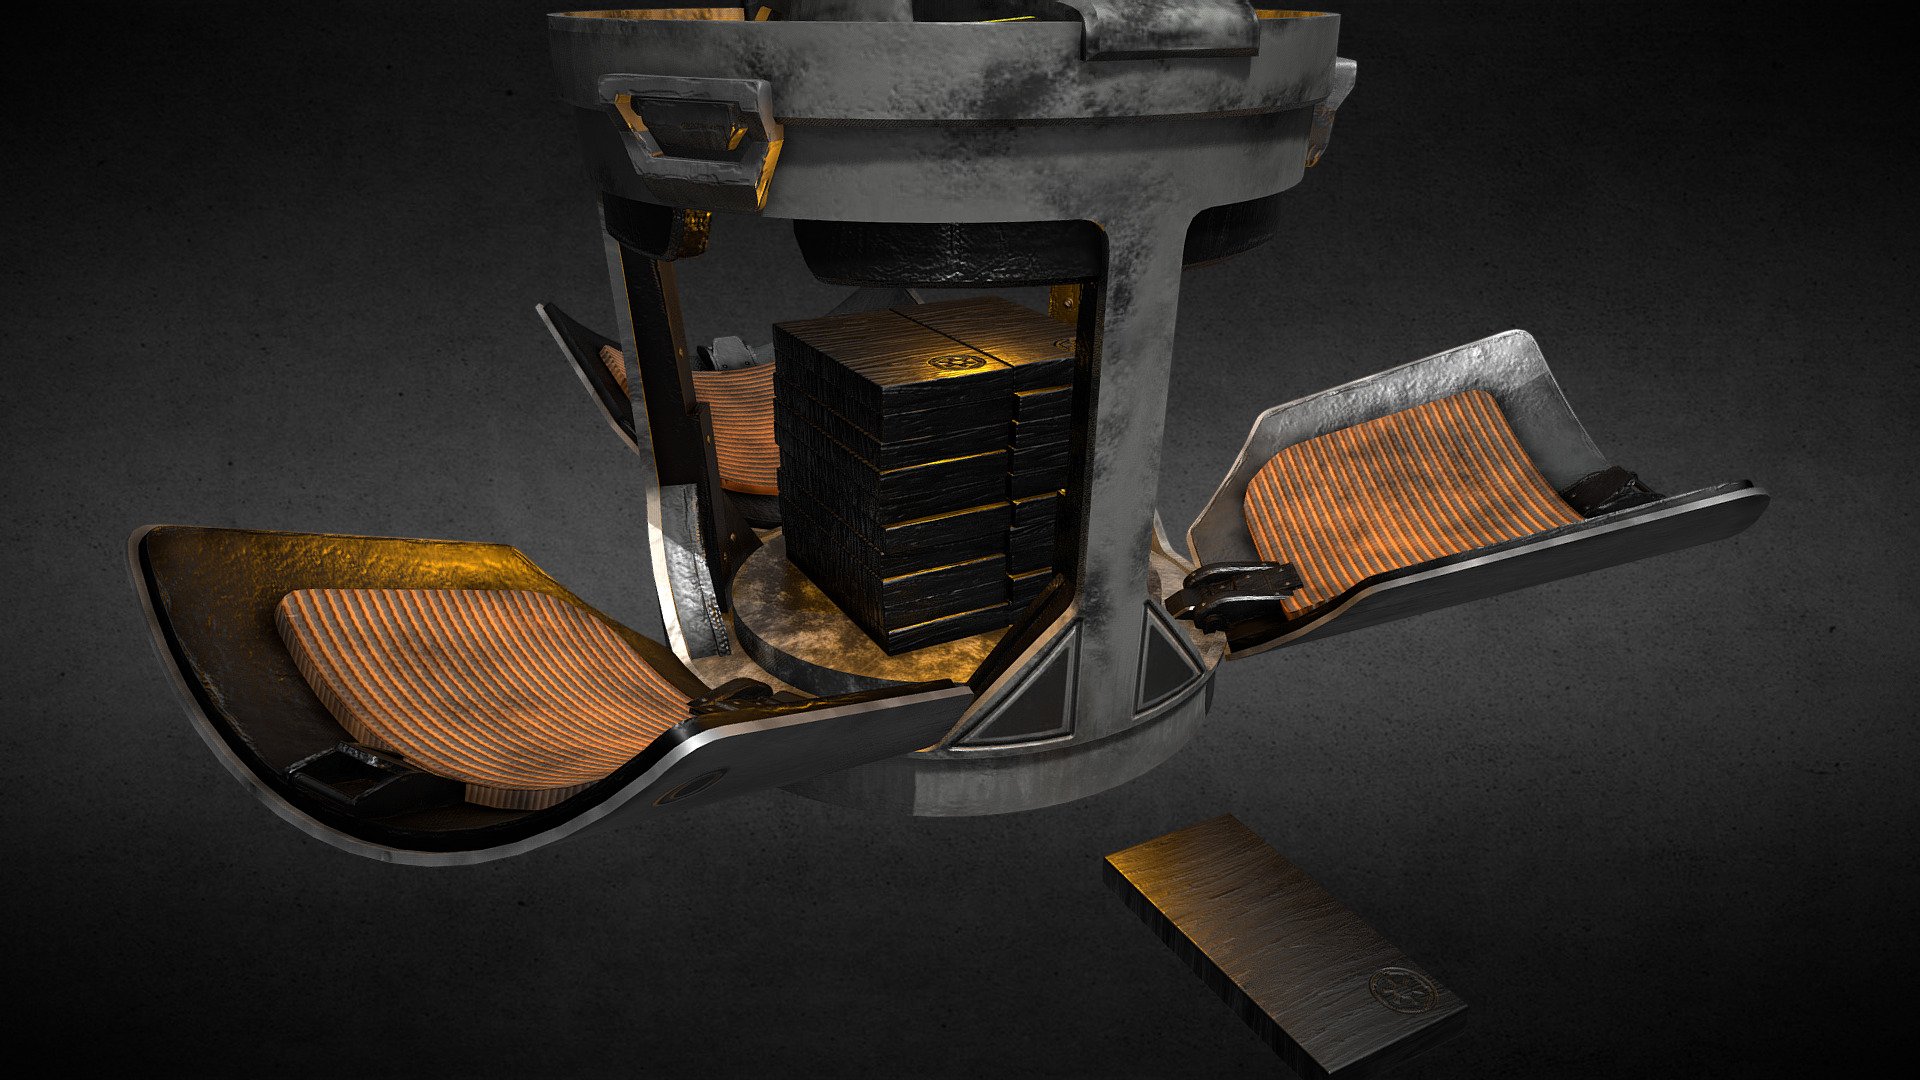 The safe from The Mandalorian is a typical asset I can get my hands on. Yet, I felt like it had to be&hellip; dirtier^^

I swore to myself long ago that never again would I do painting, would it be in 3D-Coat or Substance&hellip; especially Substance. But Substance Designer was not the kind to bear this project. I did my best with an unknown software so.

RE-UPLOAD : I added some Beskar ingots to add some authenticity. But rest assured that I made them in Designer, for God's sake 3d model